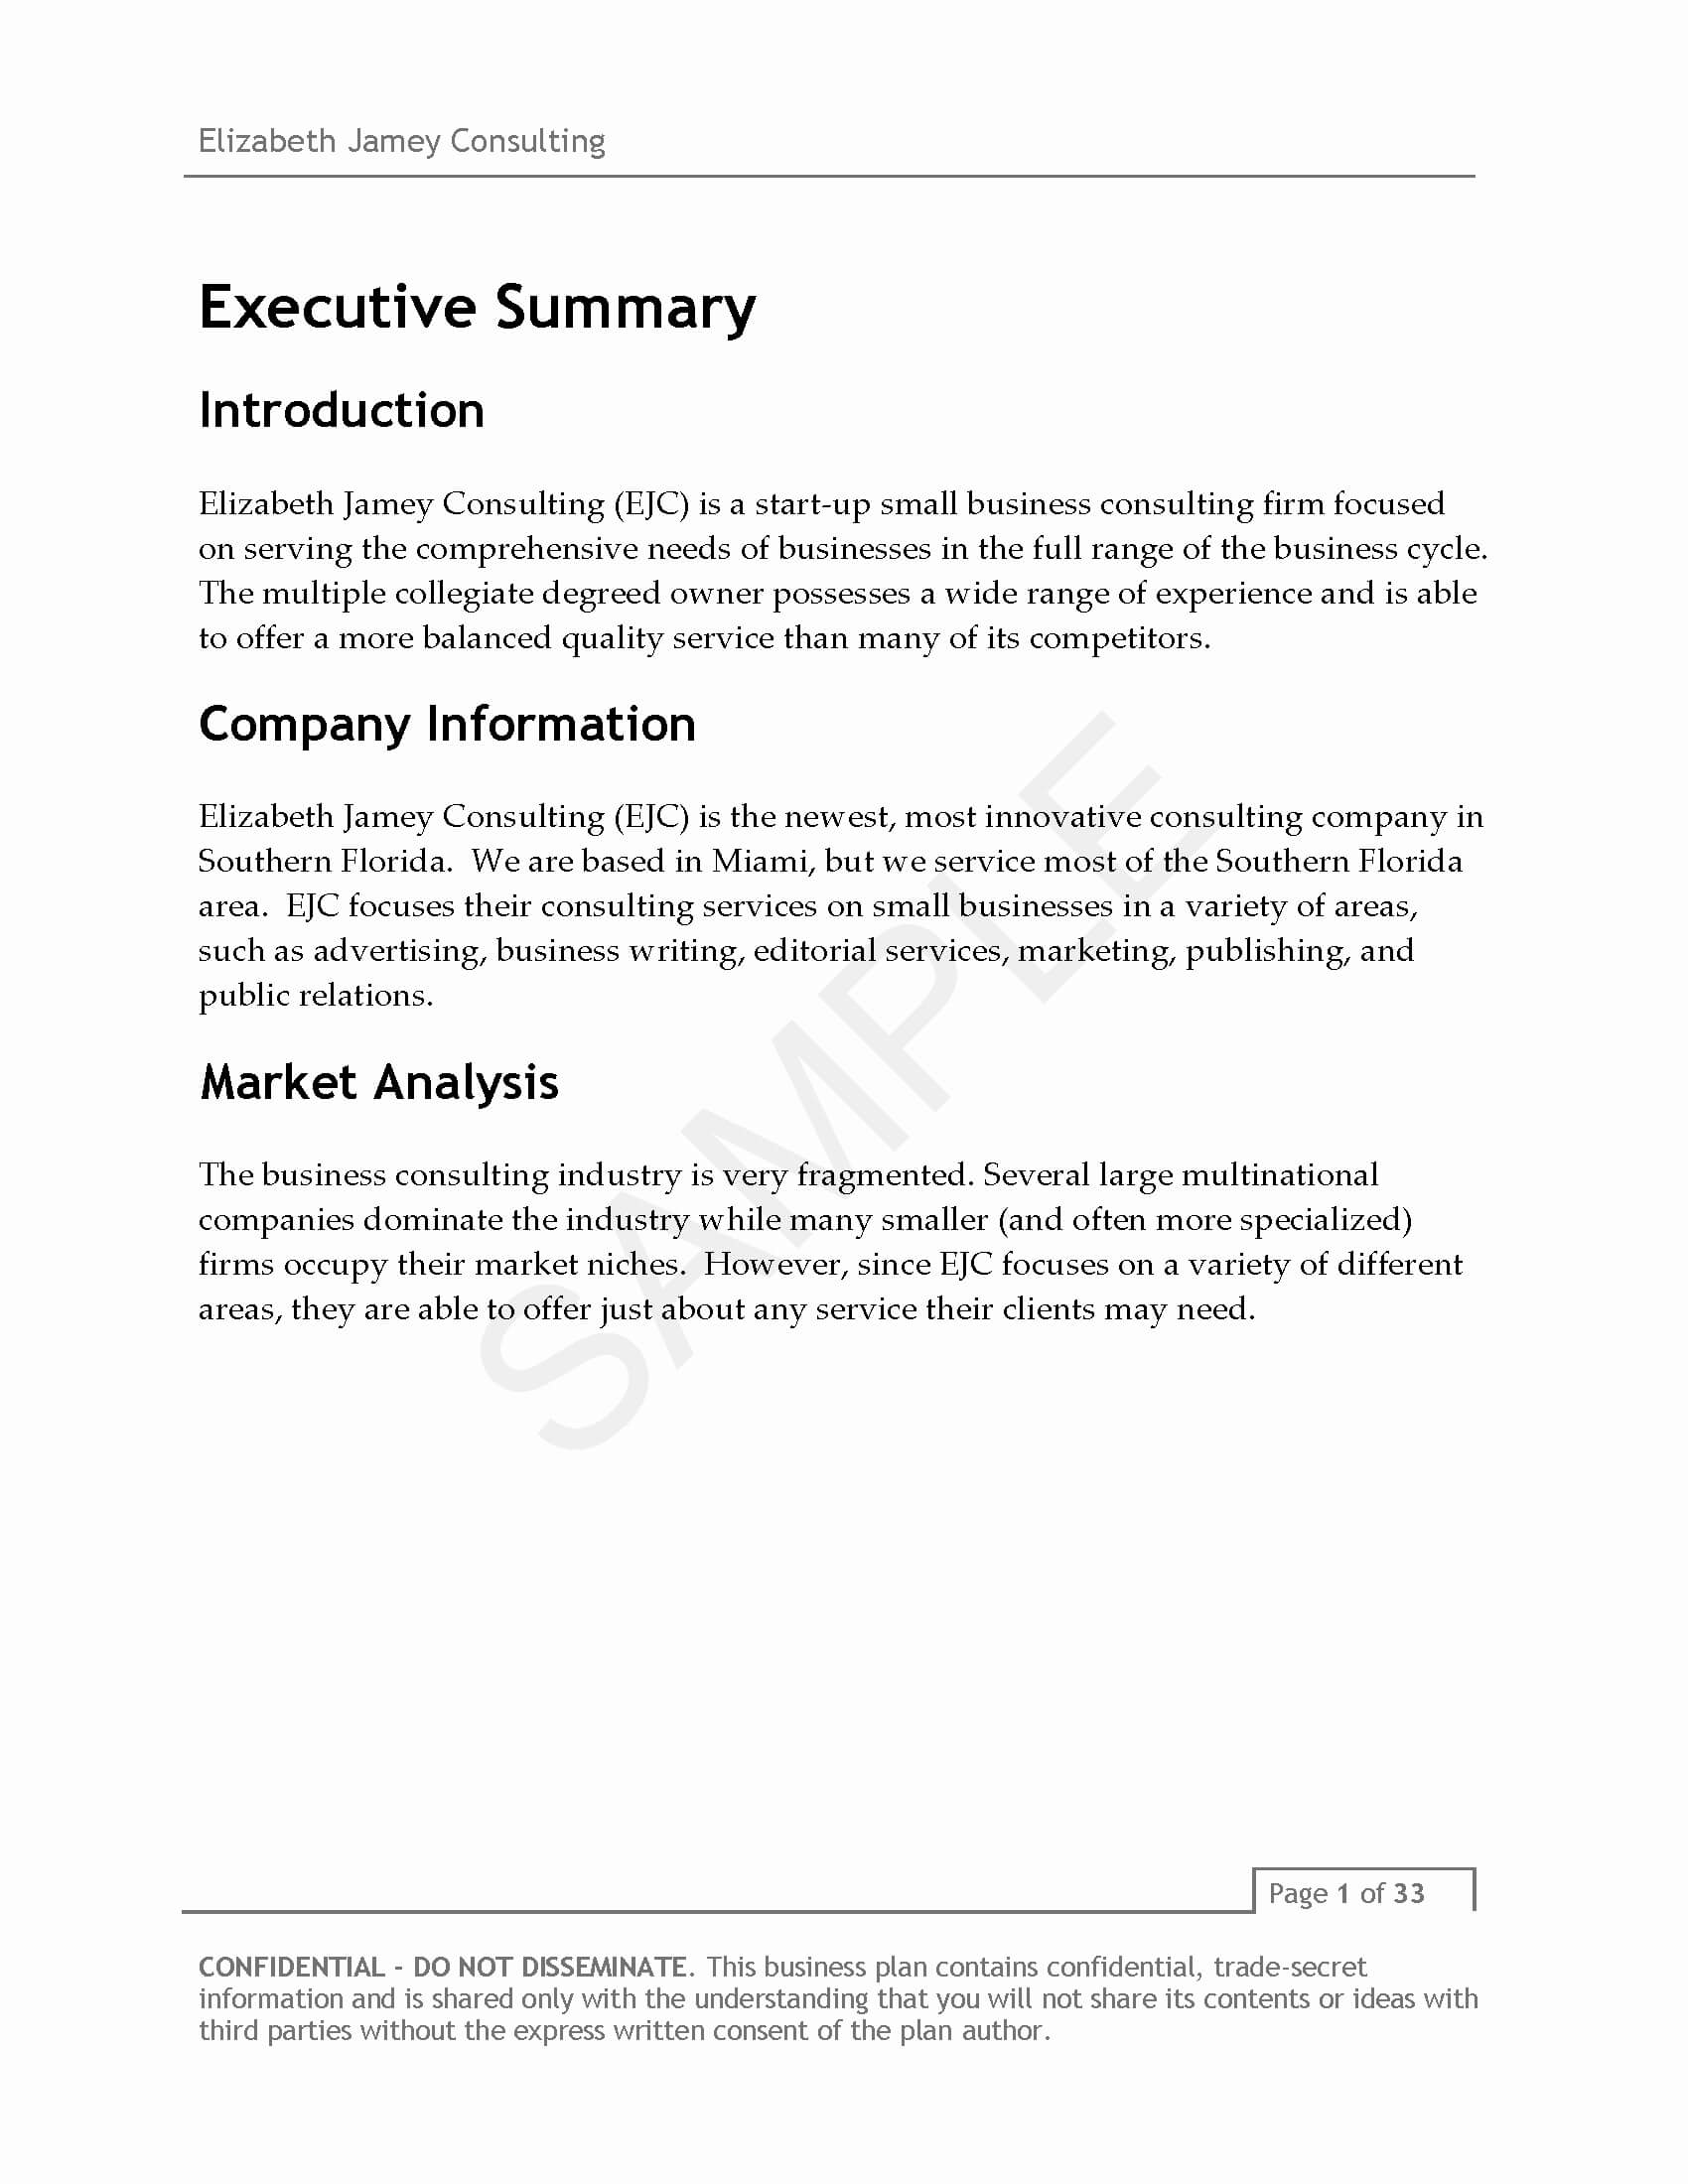 013 Consulting Business Plan Template 20Consulting Company For Business Plan Template For Security Company